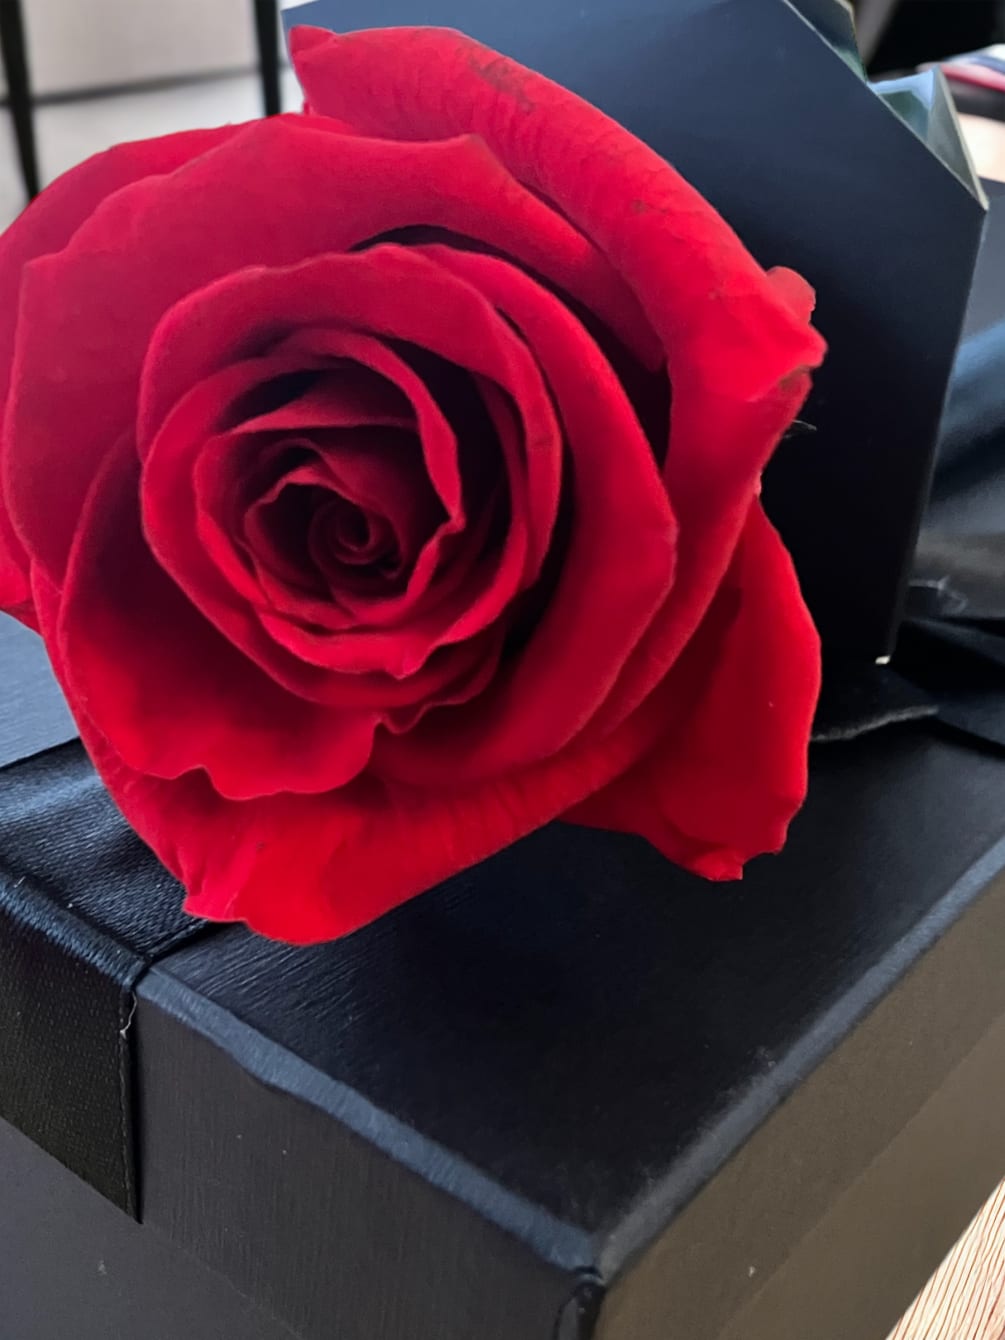 Send an everlasting preserved rose to your special someone. Fragrant and no